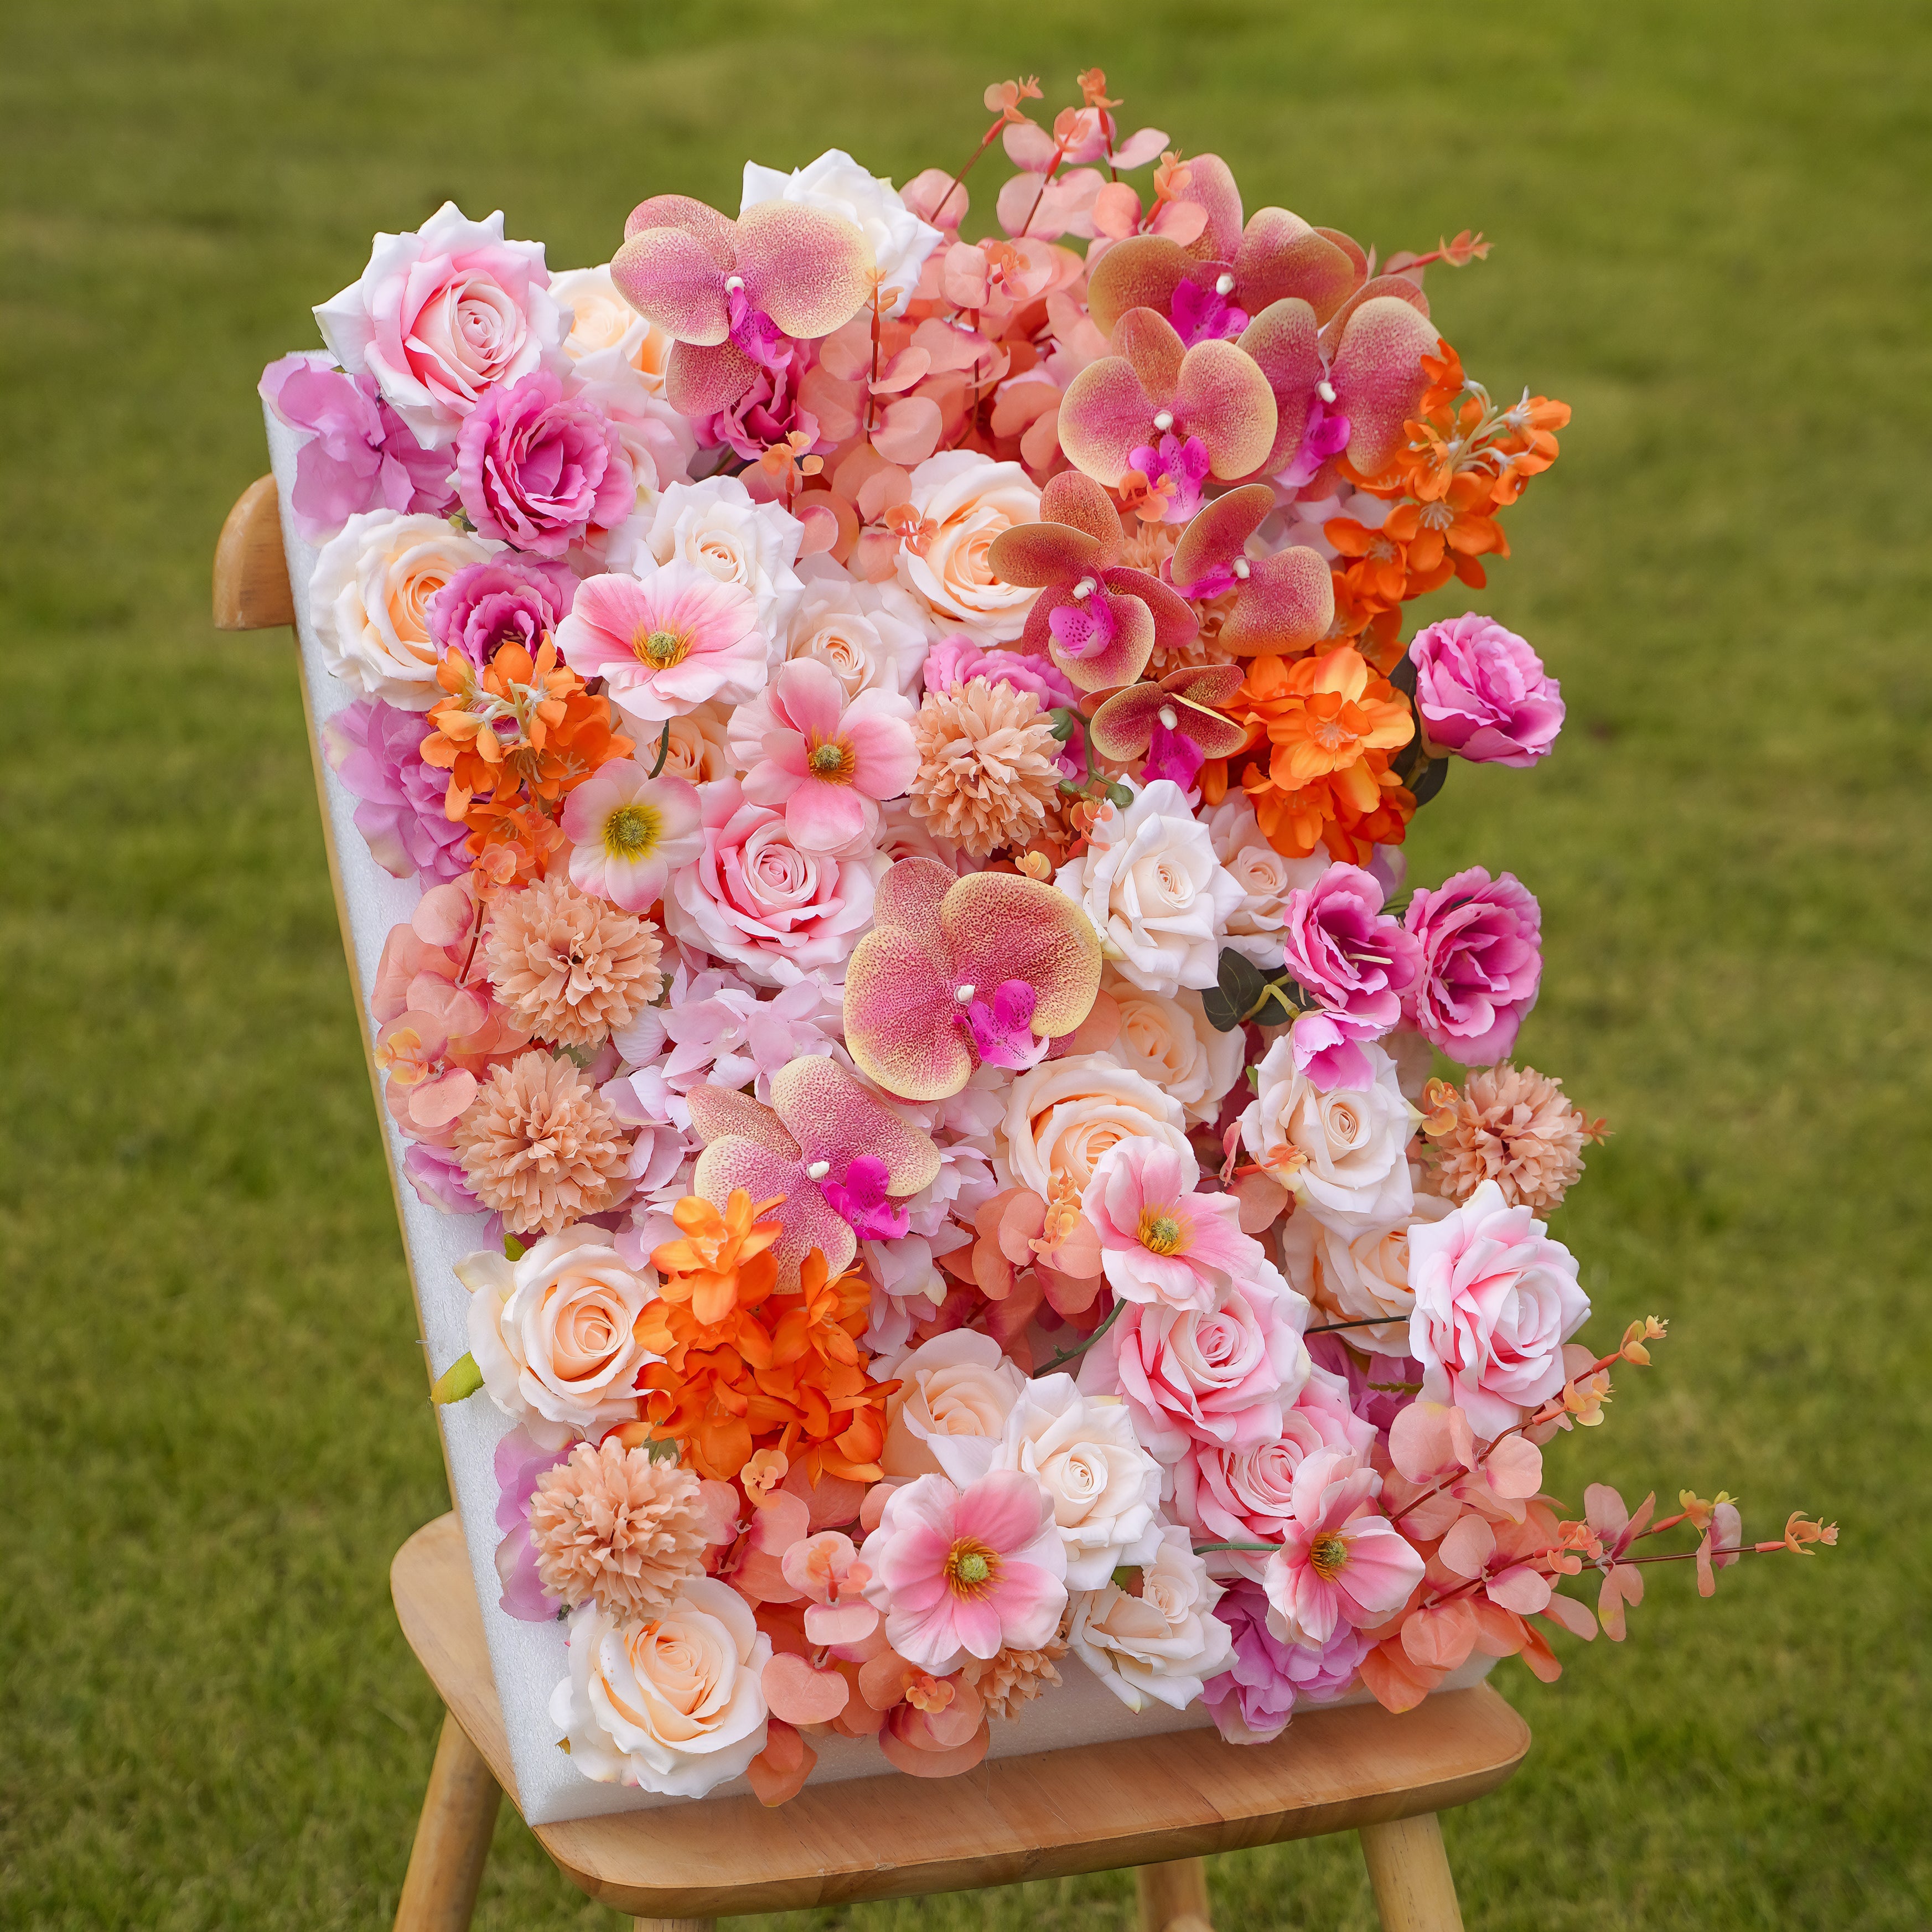 If you are looking for a unique and stylish way to decorate your home, a Rosemorning 5D flower wall is a great option.